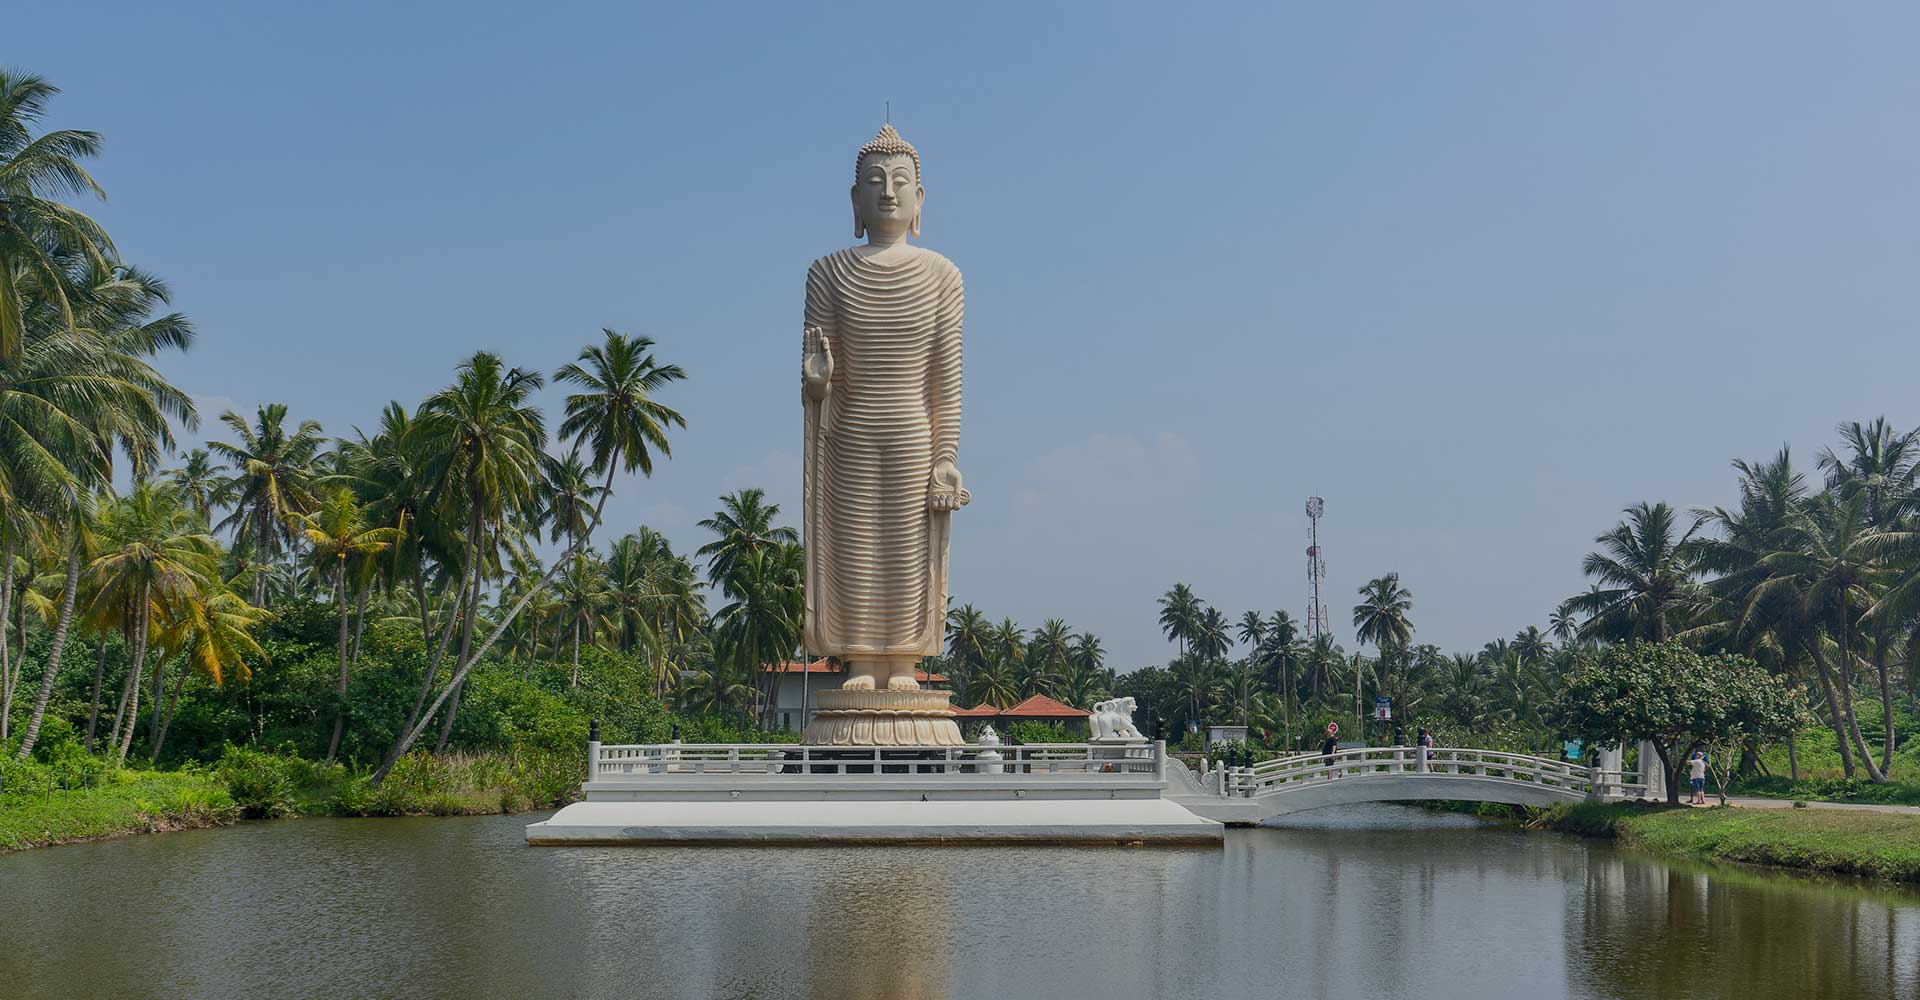 Statue of Lord Buddha, that towers around its surroundings.